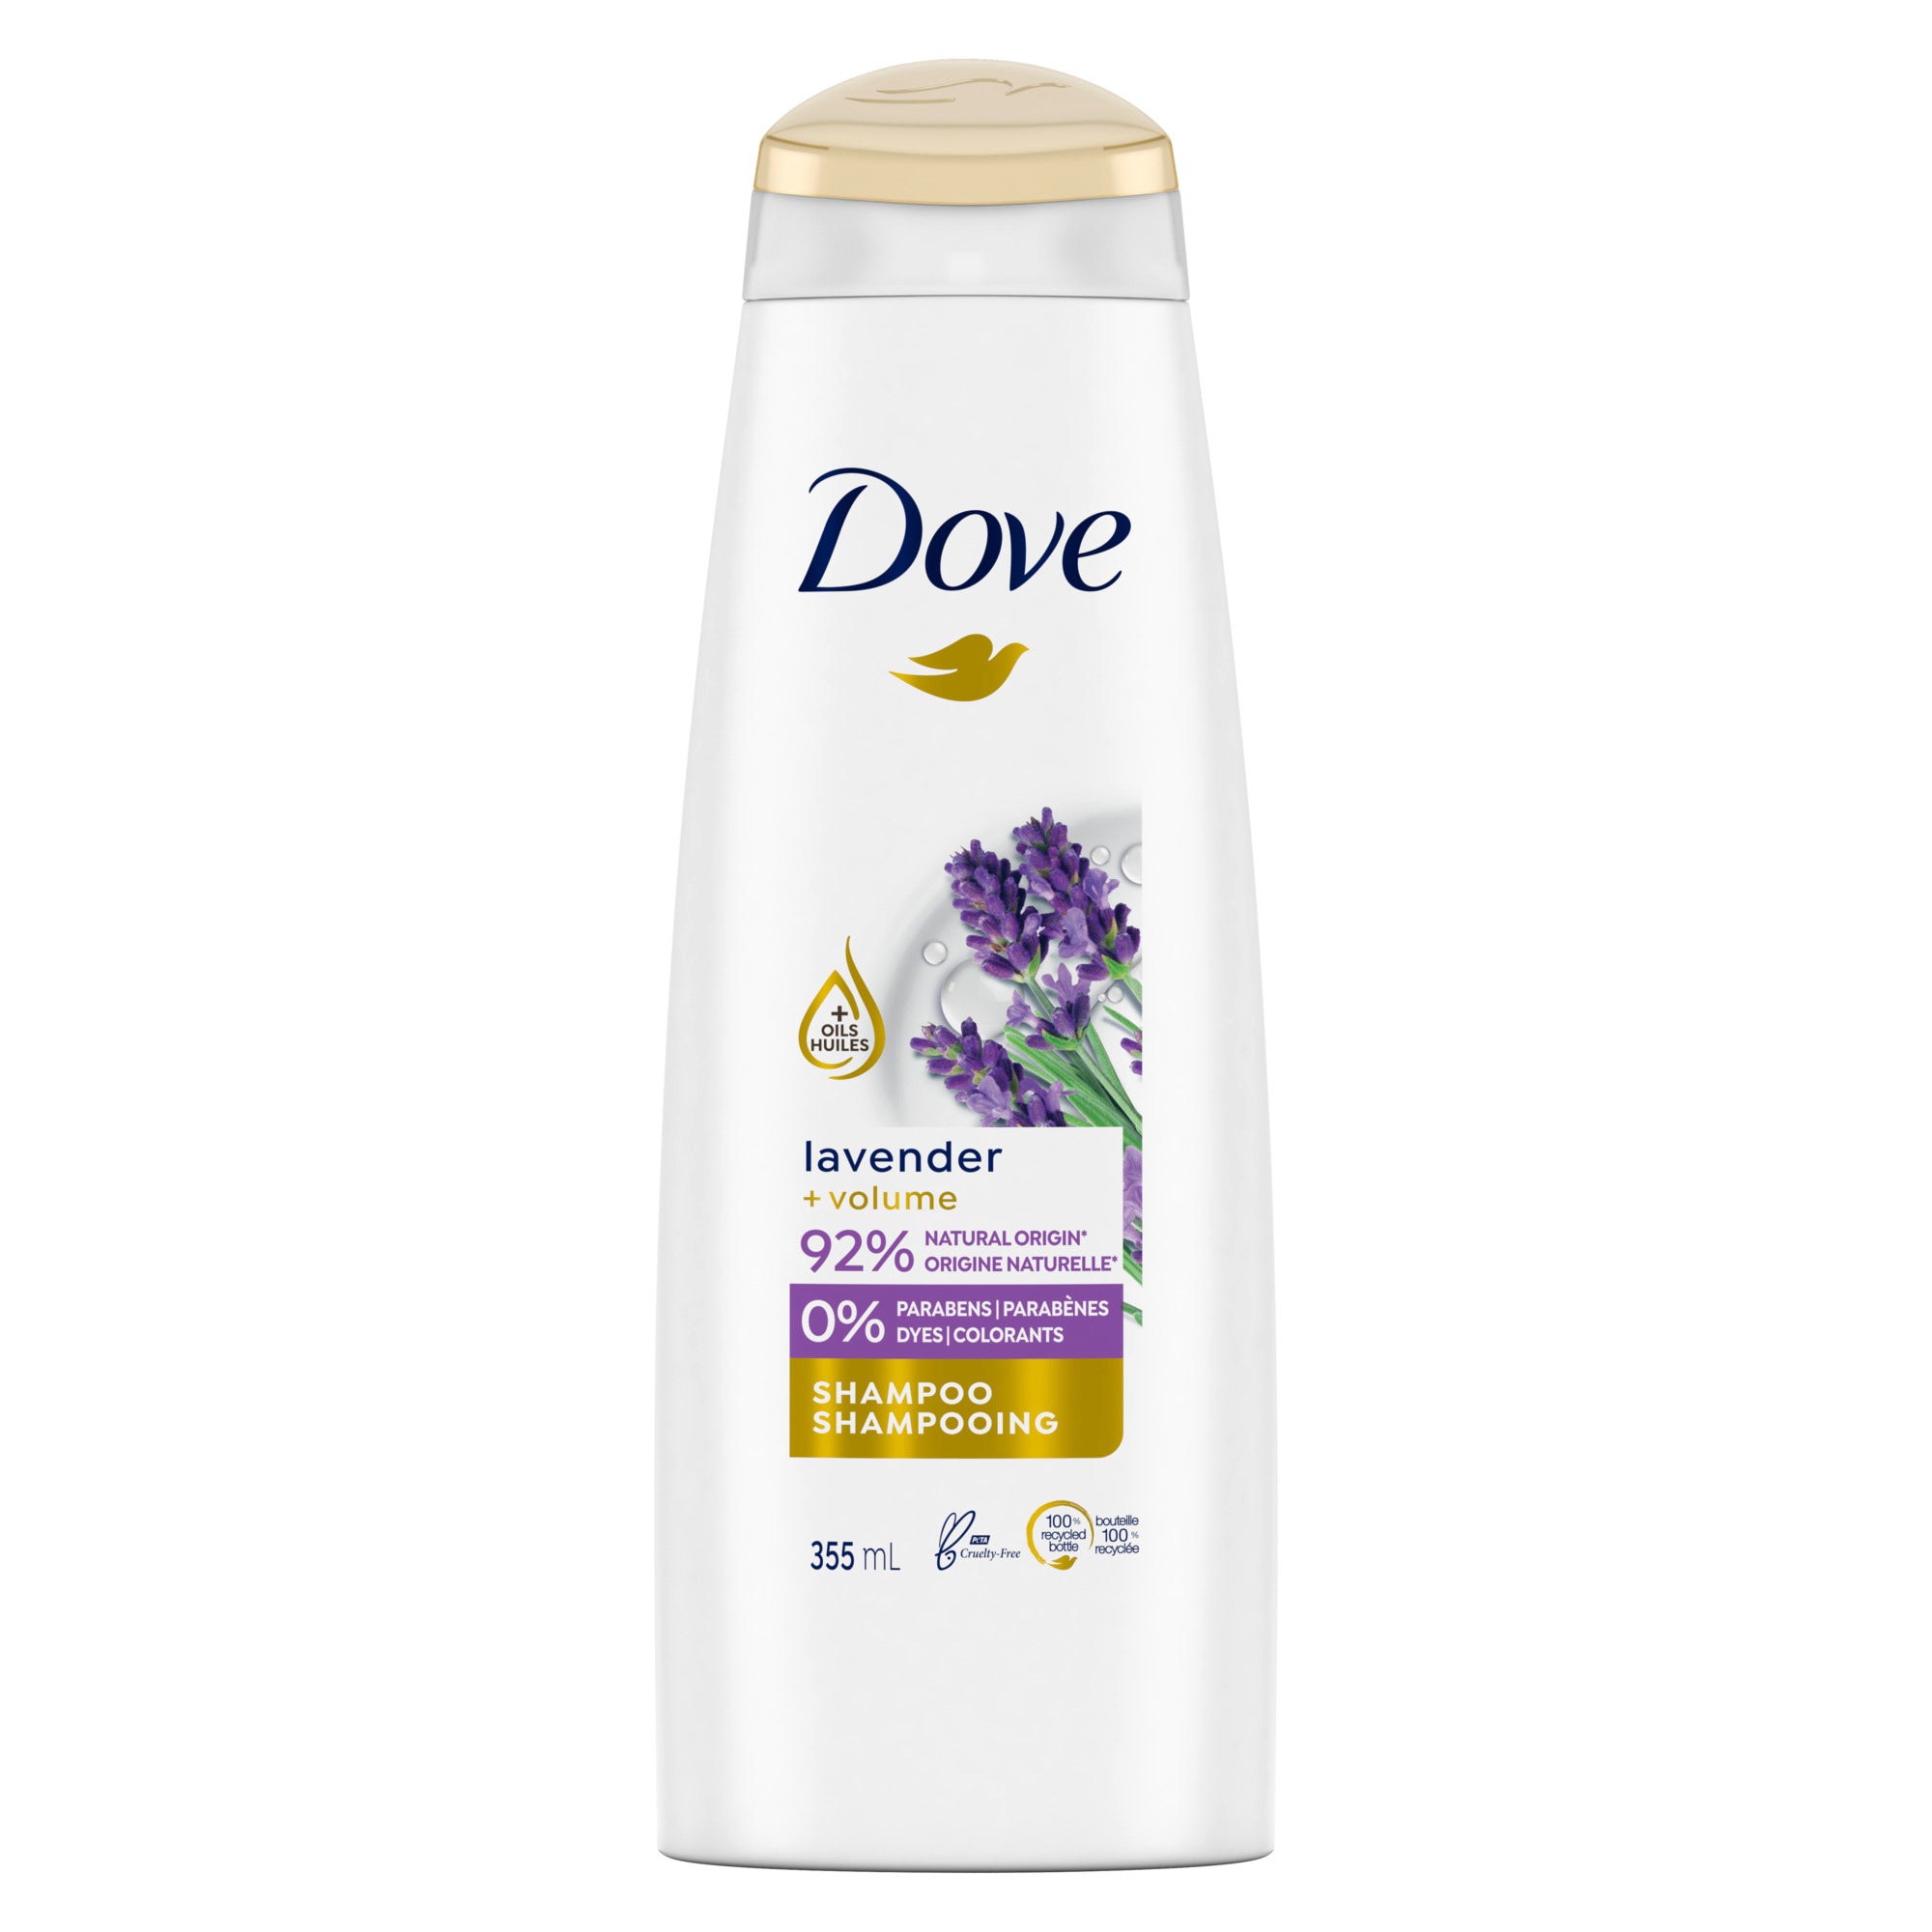 Showing the front angle view of the Dove Nourishing Secrets Shampoo Thickening Ritual Lavender 355ml product.